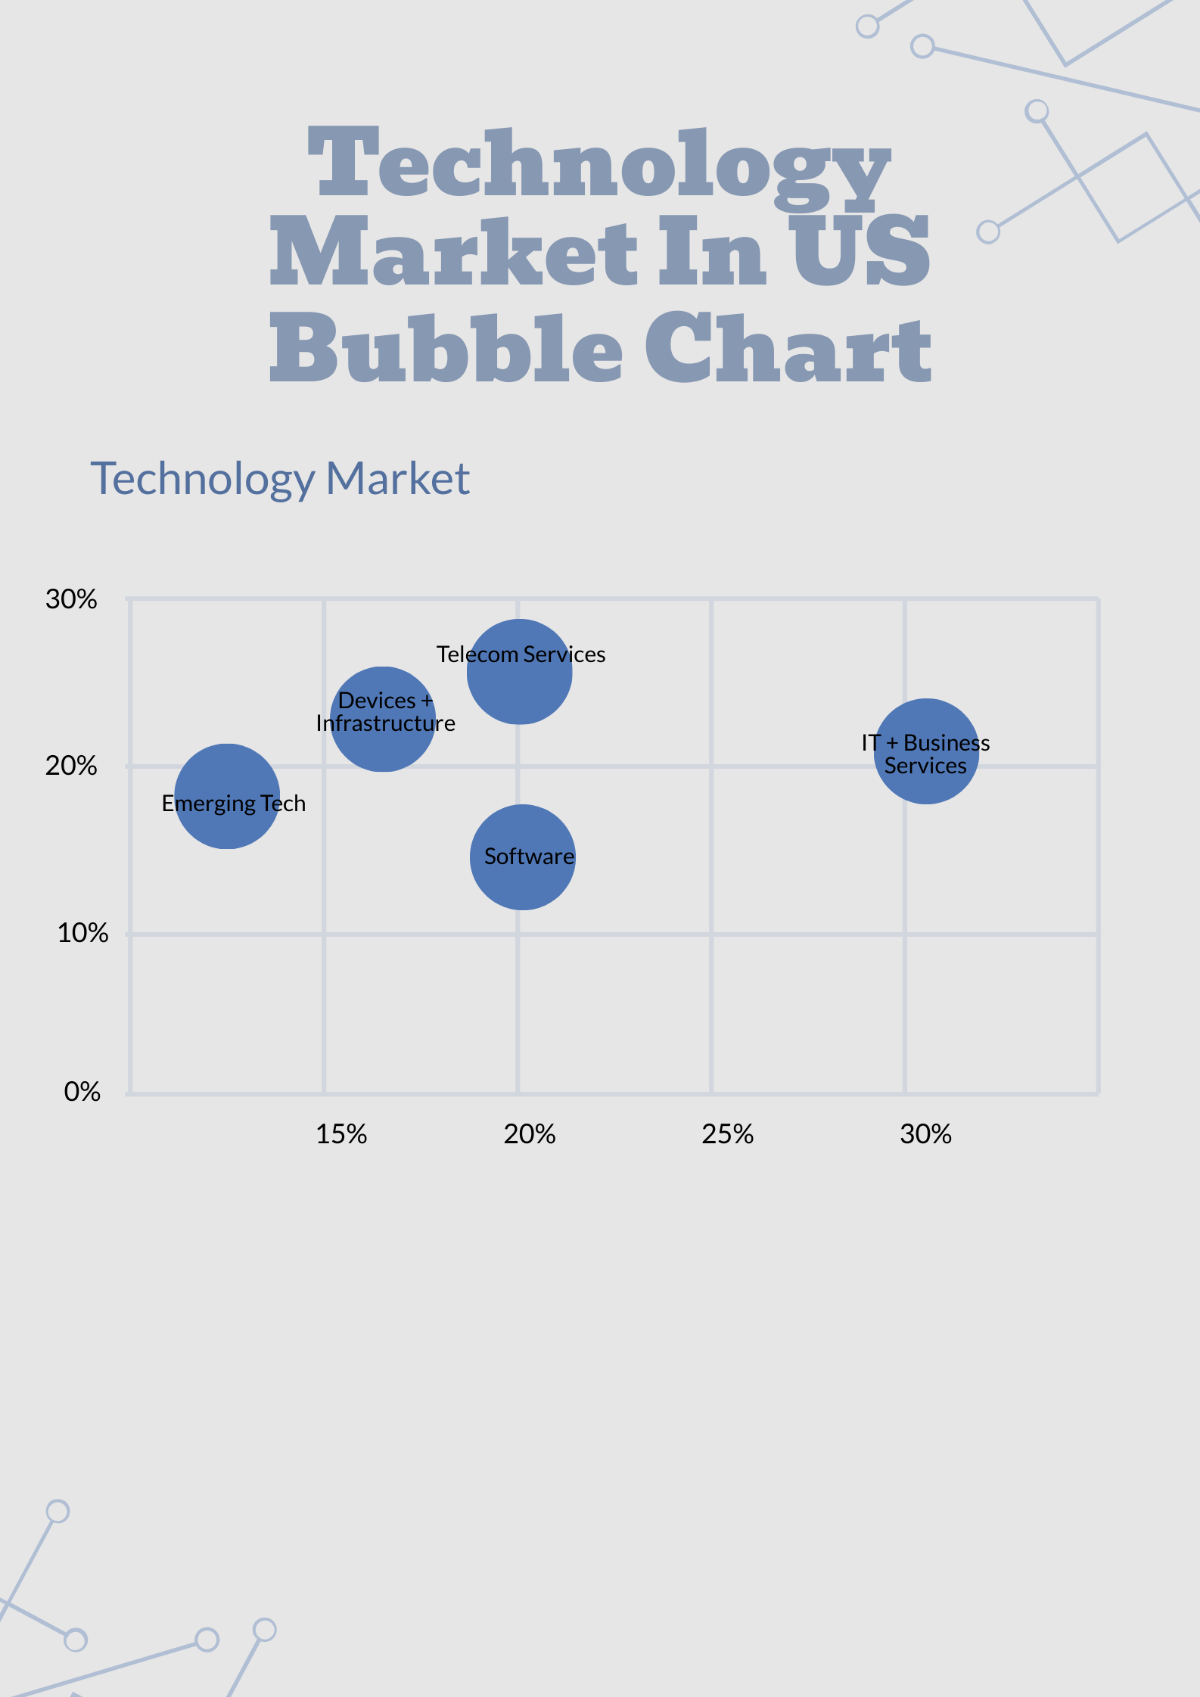 Technology Market In US Bubble Chart Template